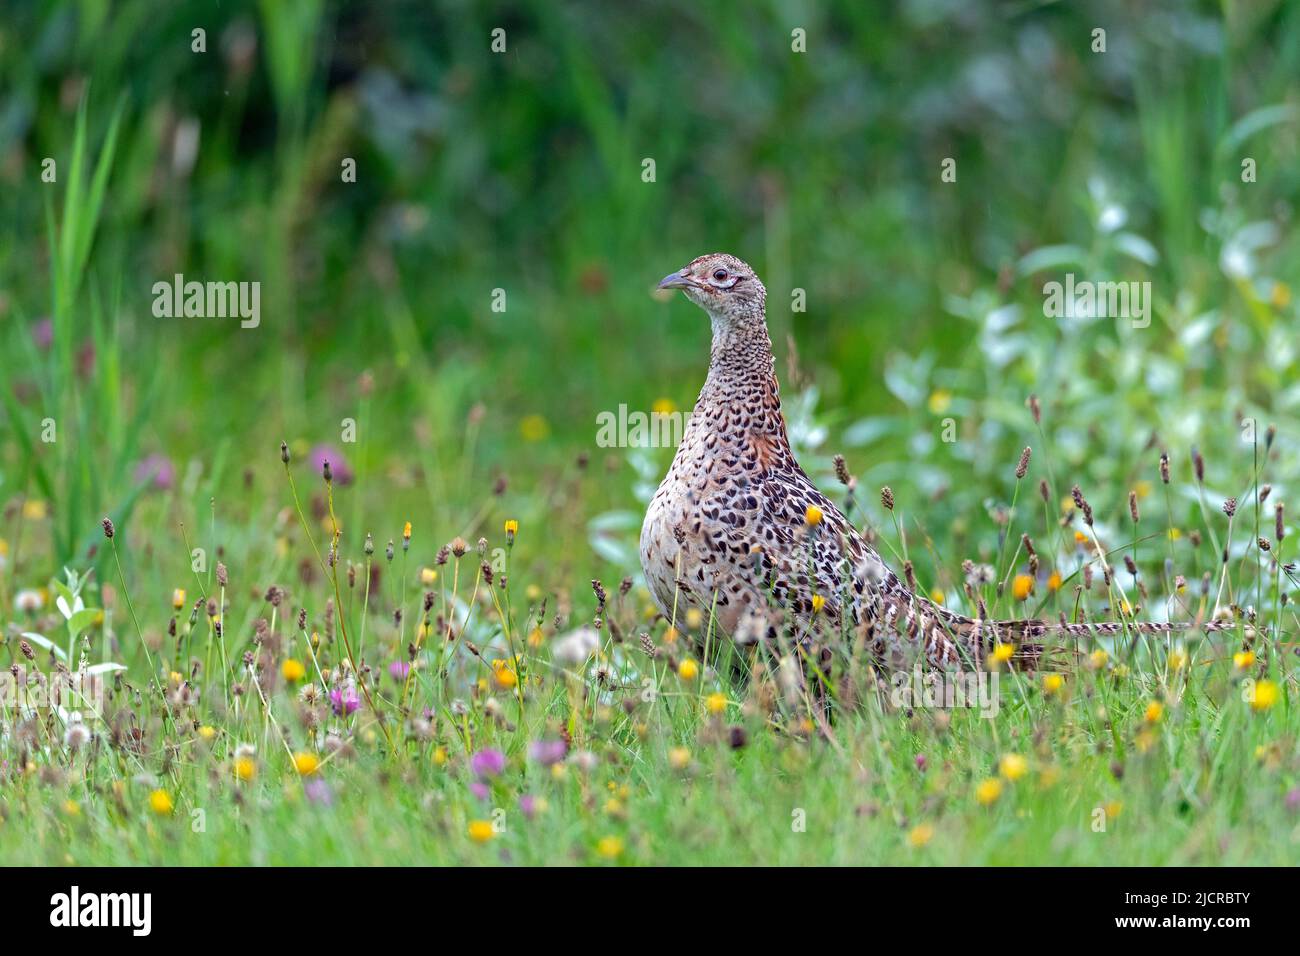 Common Pheasant, Ring-necked Pheasant (Phasianus colchicus). Frequently the hen interrupts the search for food and observes the surroundings attentively. Germany Stock Photo